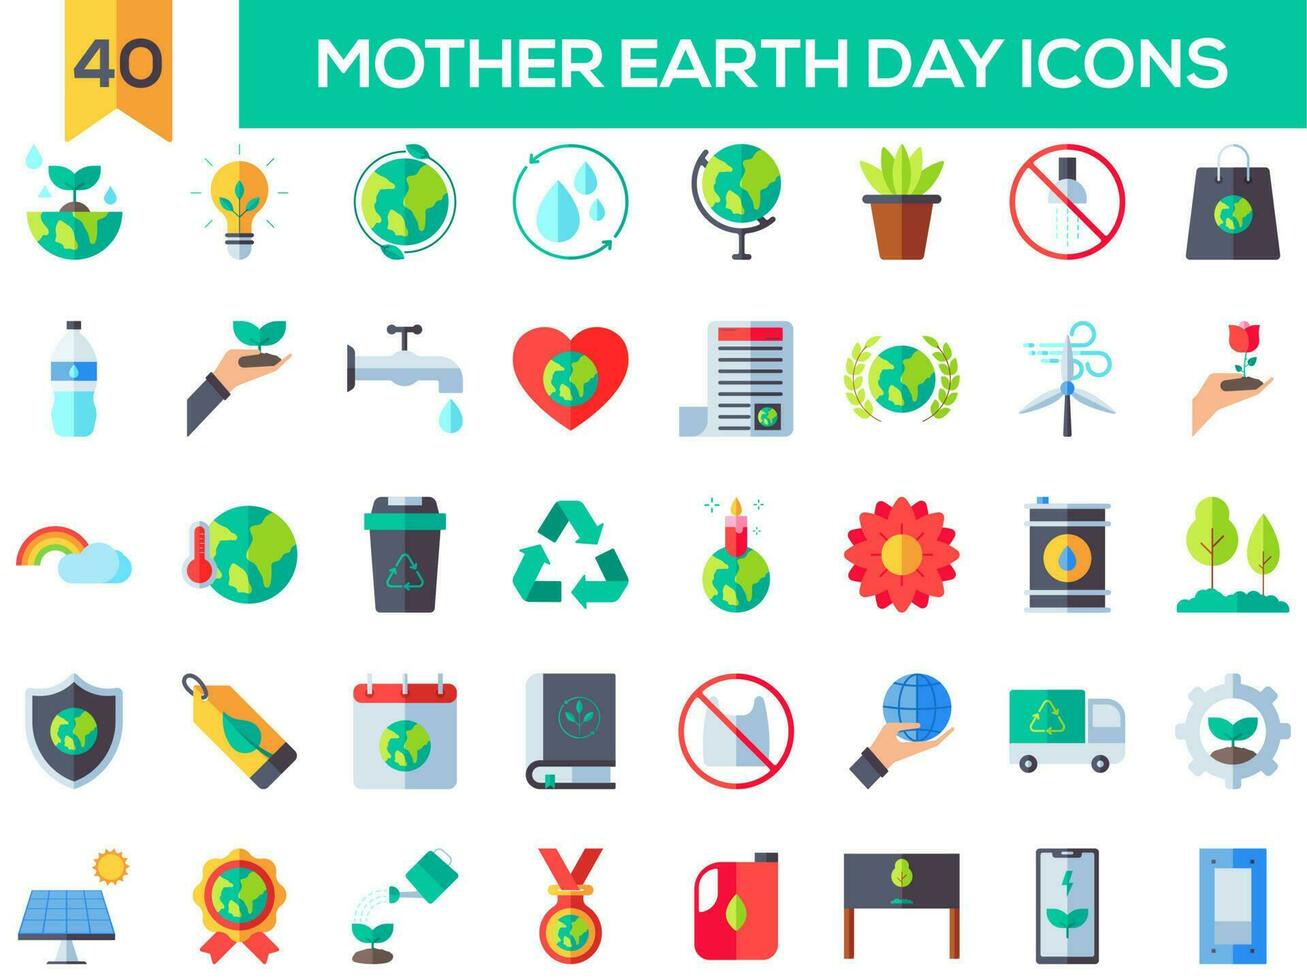 Illustration of 40 MOTHER EARTH DAY ICONS. vector